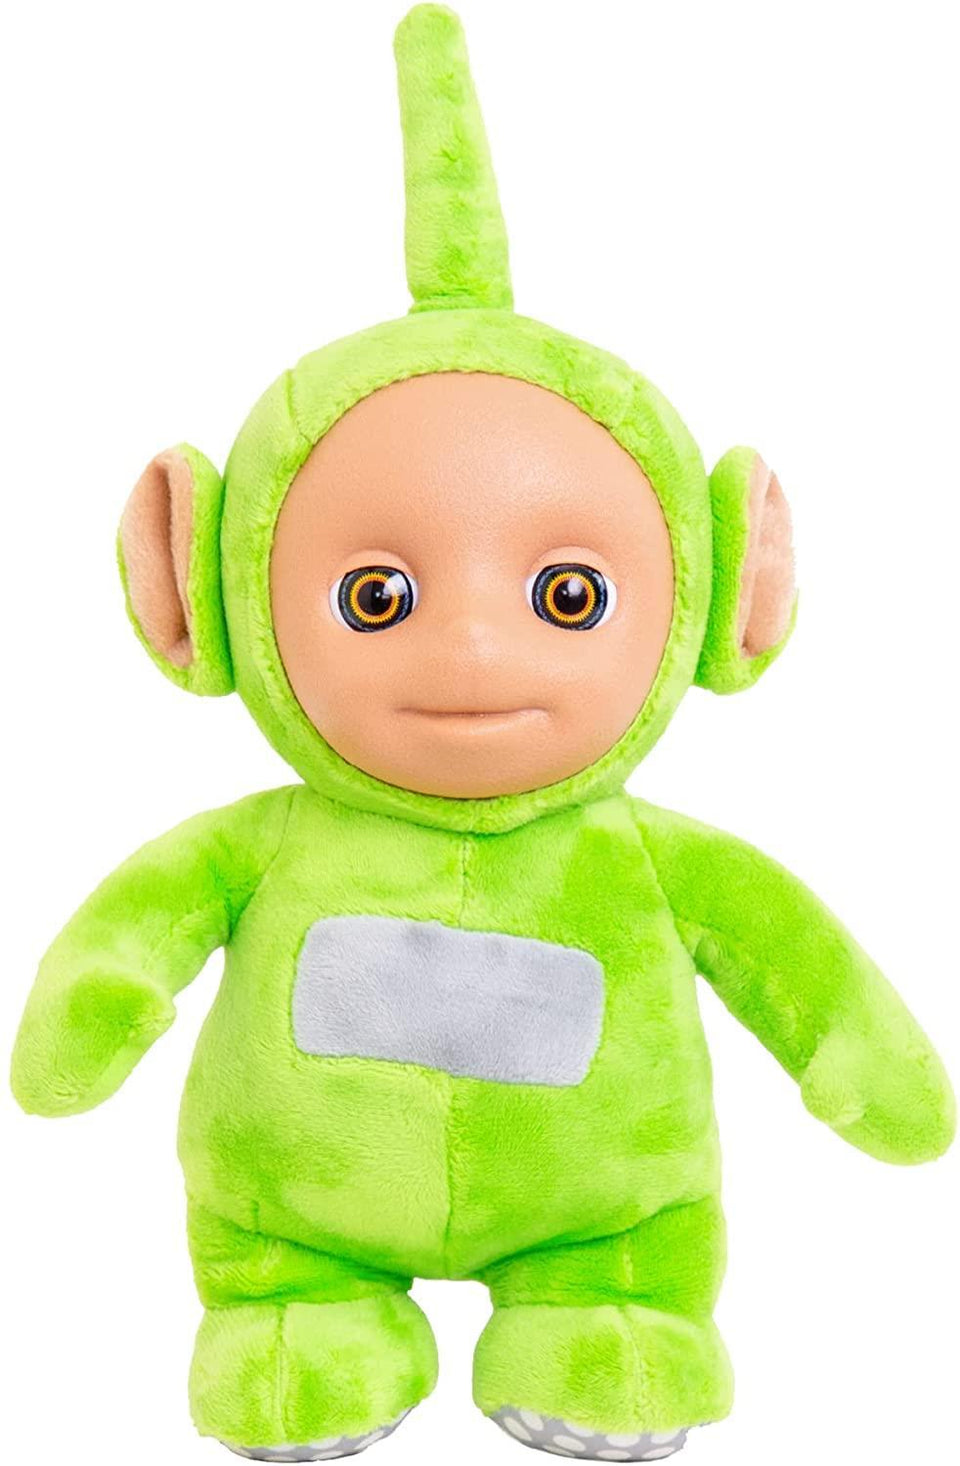 Teletubby Talking Dipsy Green Plush 11" Character Doll Teletubbies Toy Mighty Mojo